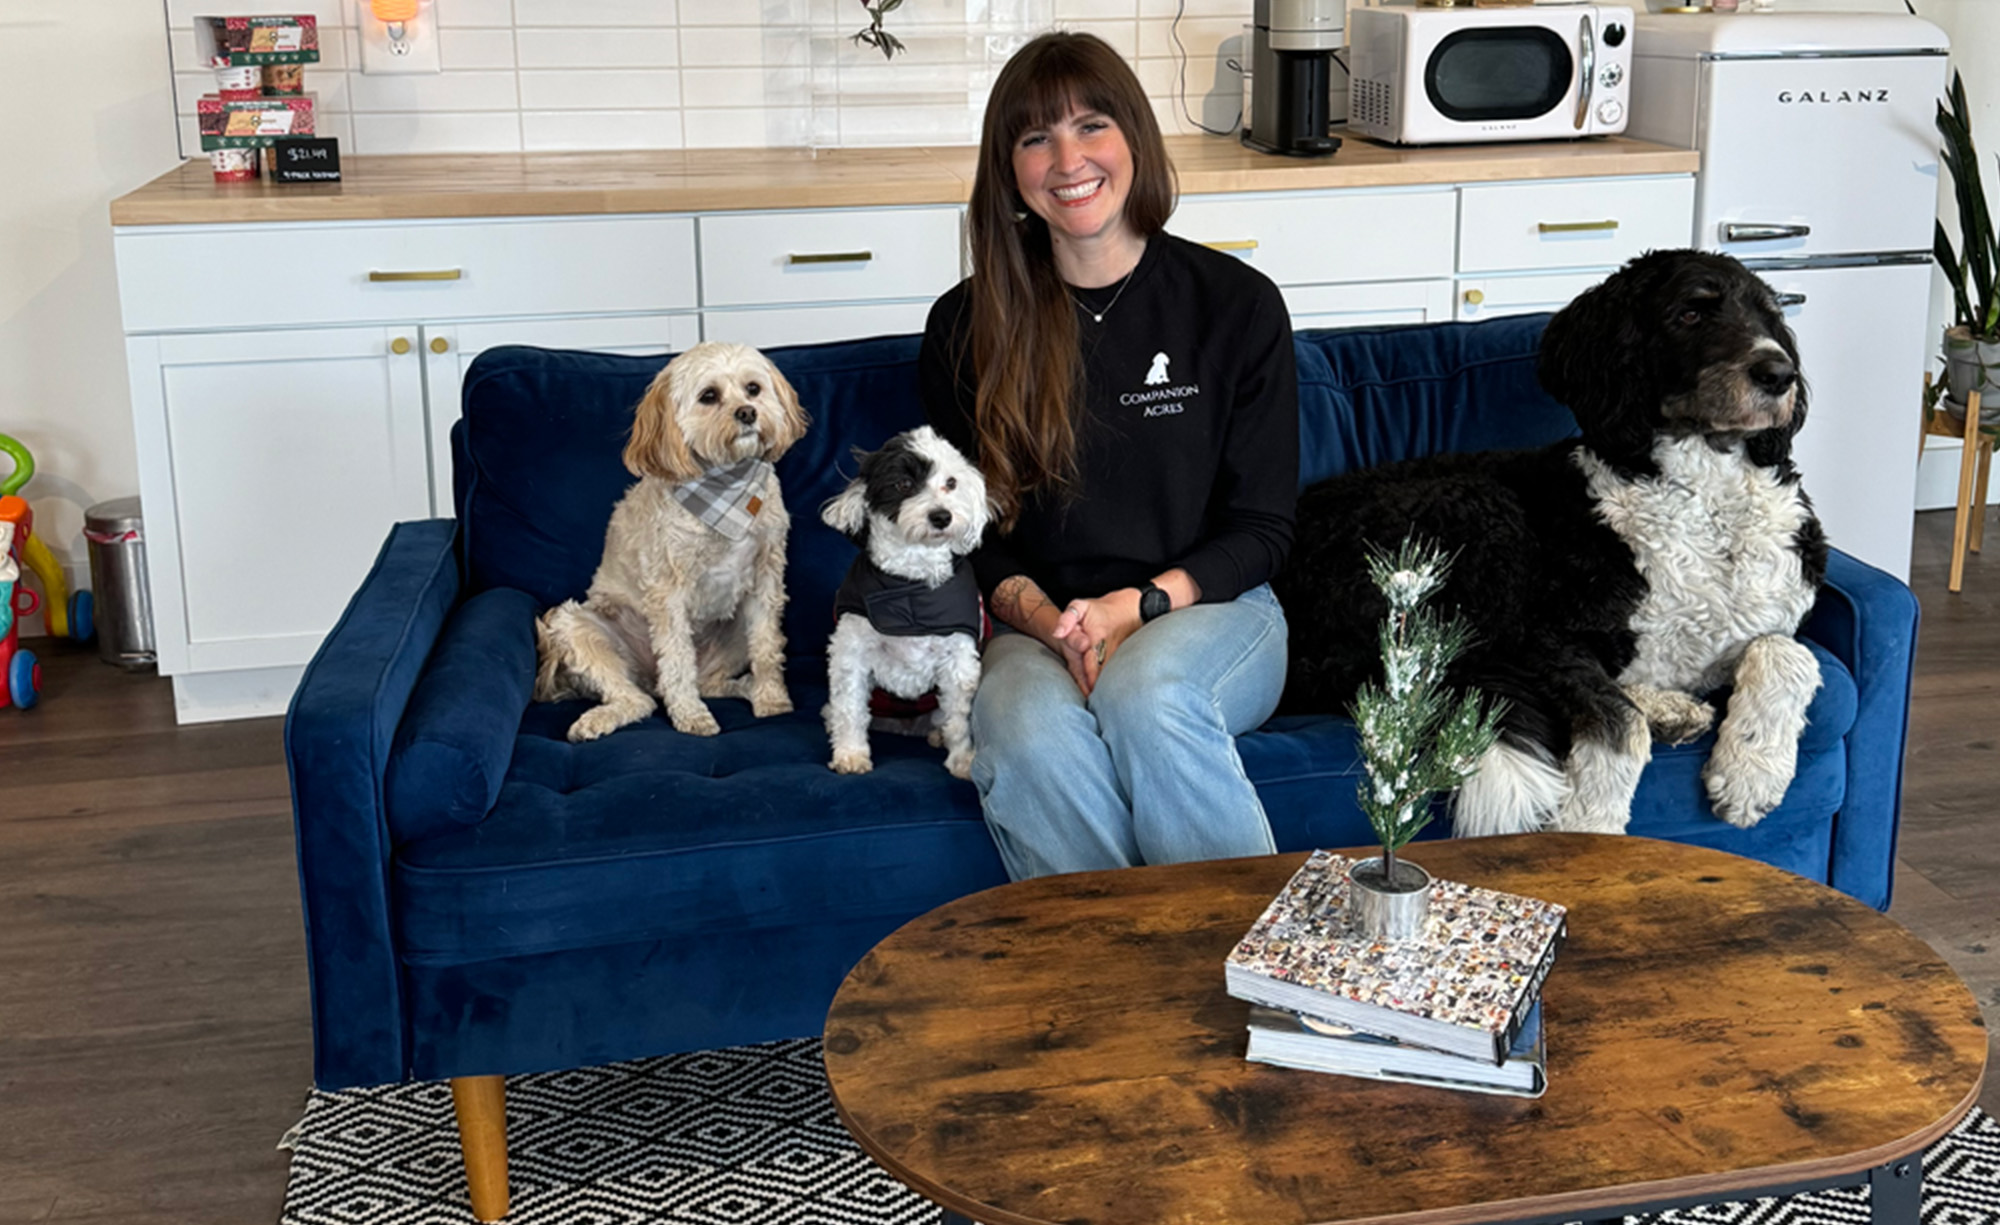 Allison Kocak with dogs on a couch